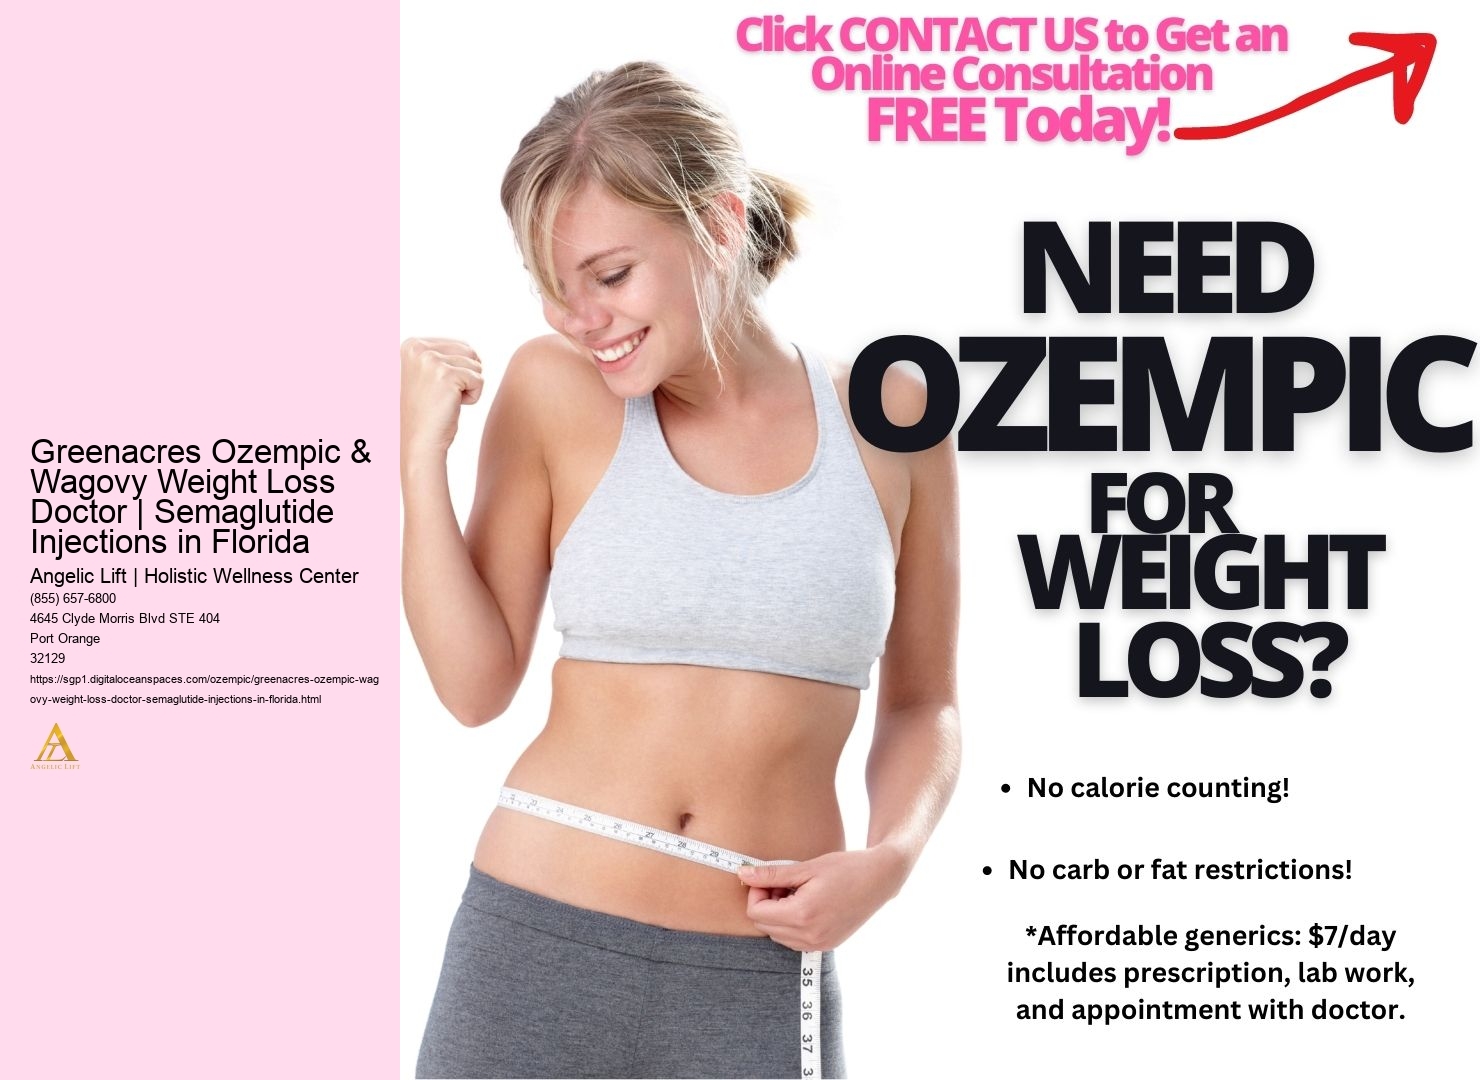 Greenacres Ozempic & Wagovy Weight Loss Doctor | Semaglutide Injections in Florida